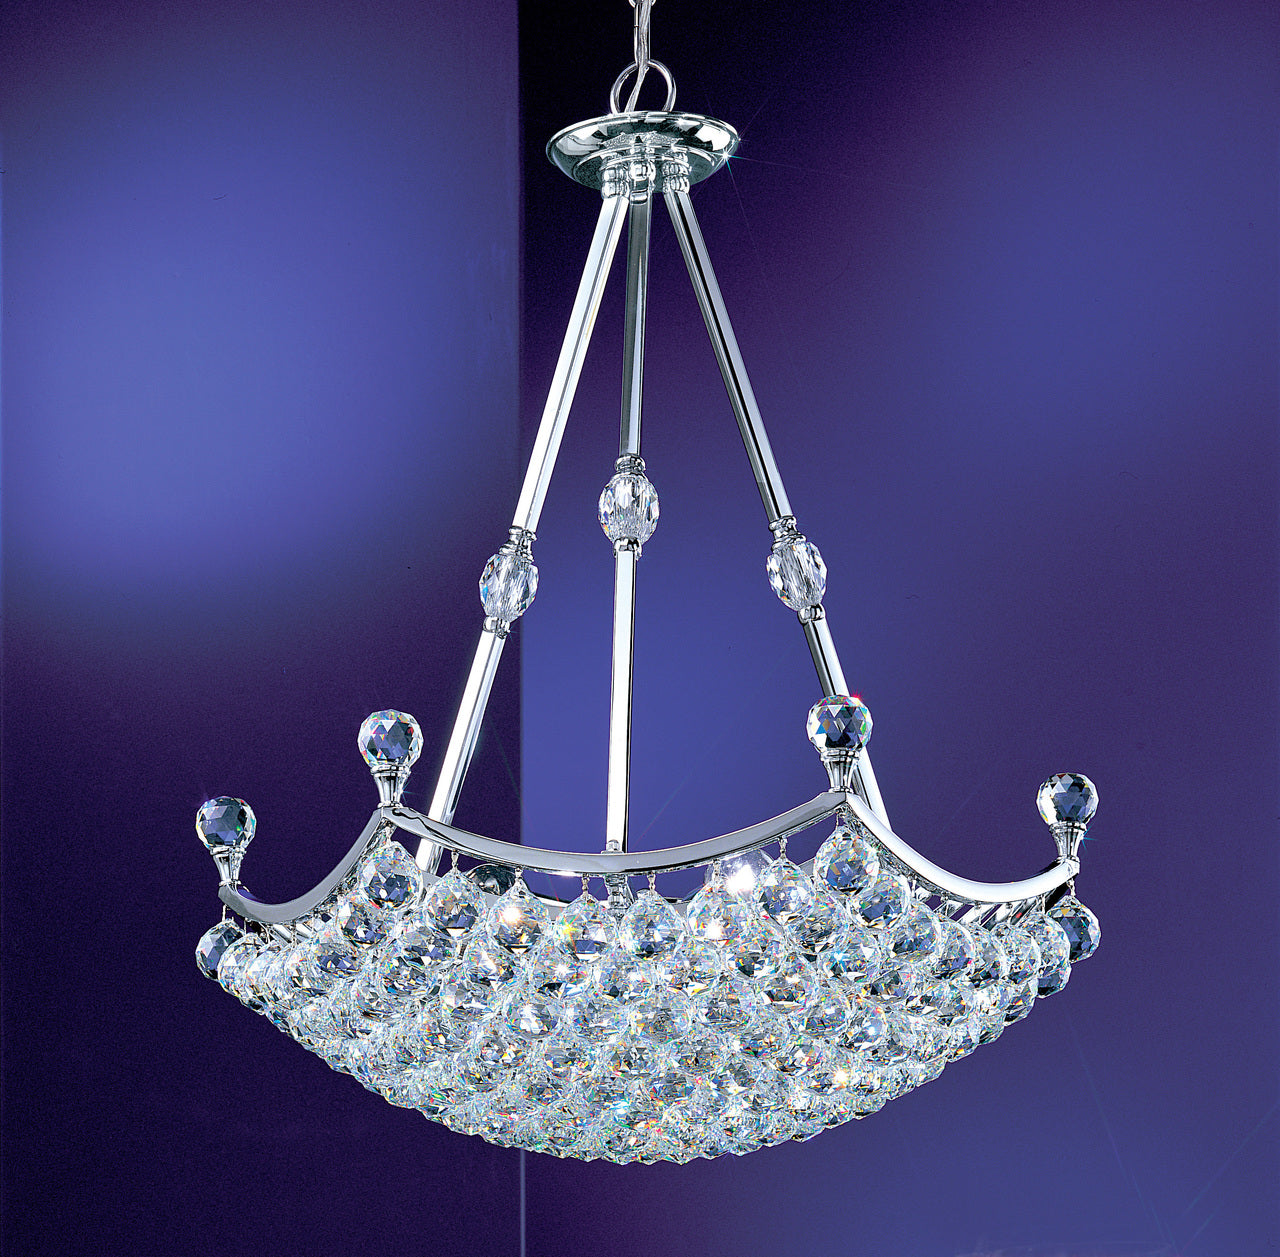 Classic Lighting 69773 CH S Solitaire Crystal Pendant in Chrome